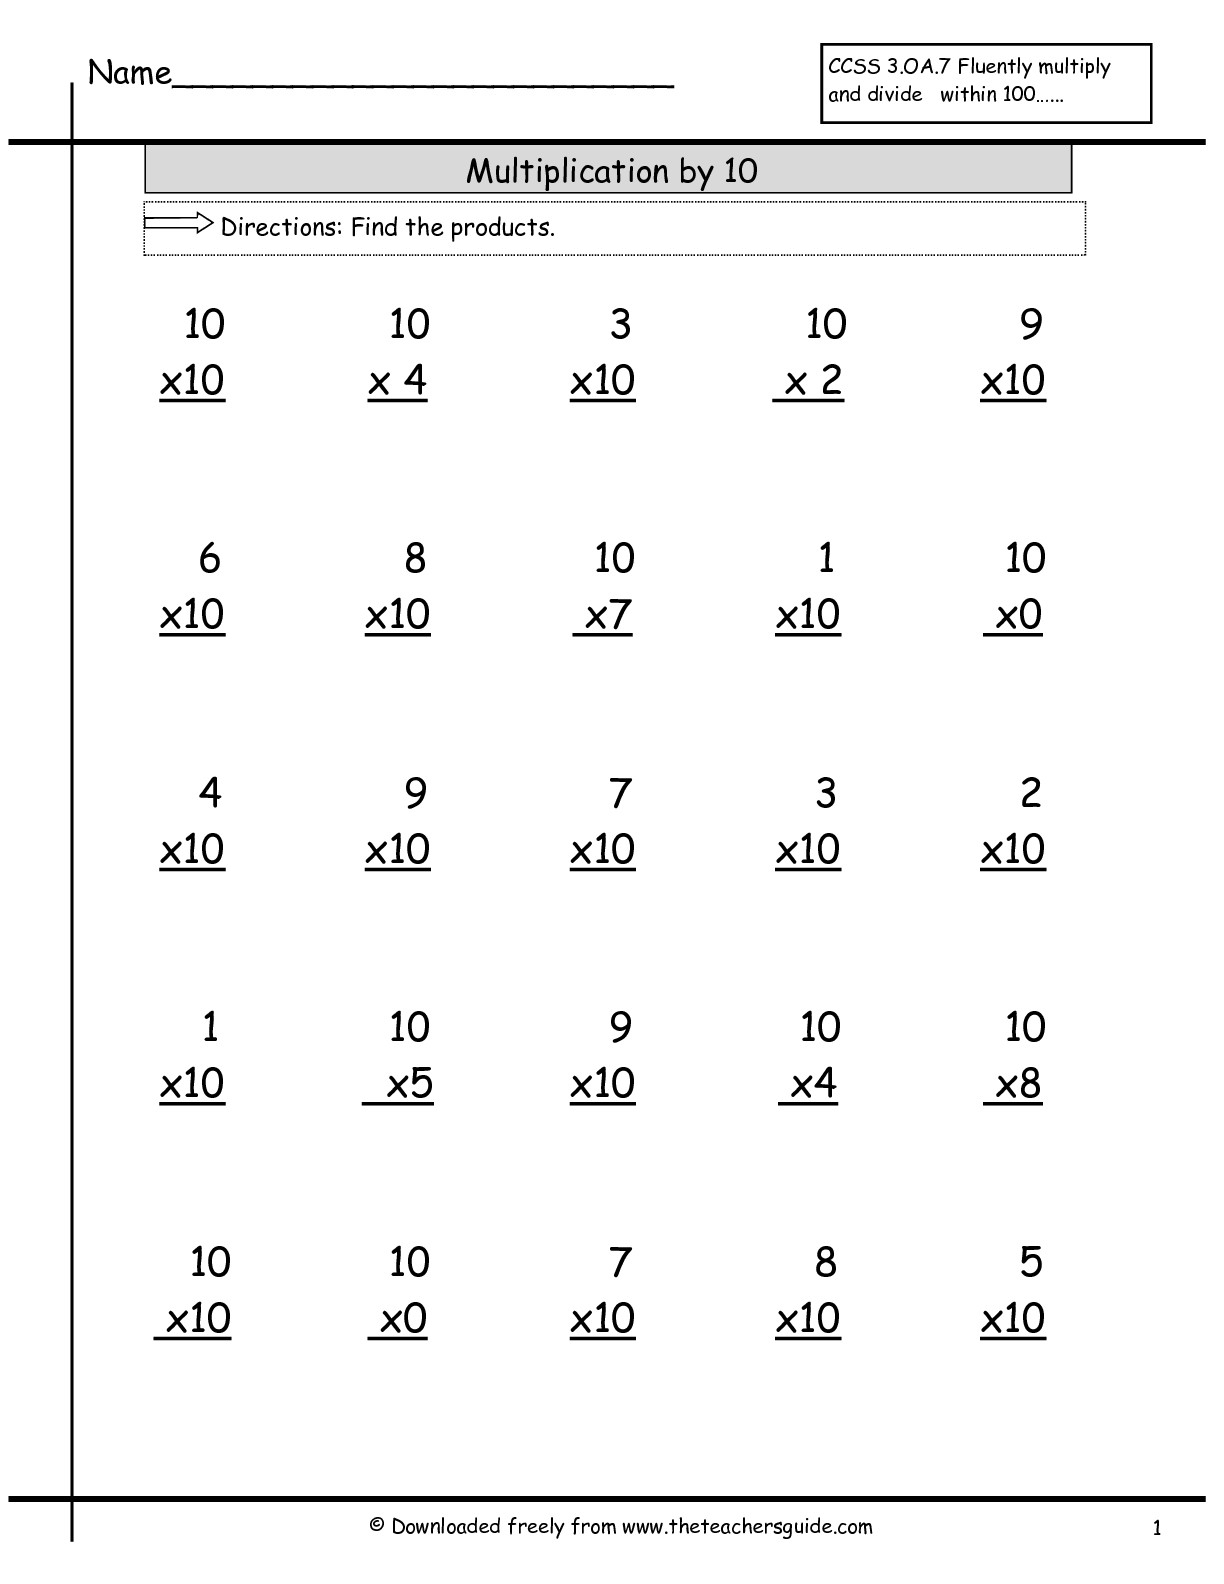 Multiplication Facts Worksheets From The Teacher&amp;#039;s Guide inside Printable Multiplication Quiz 0-10